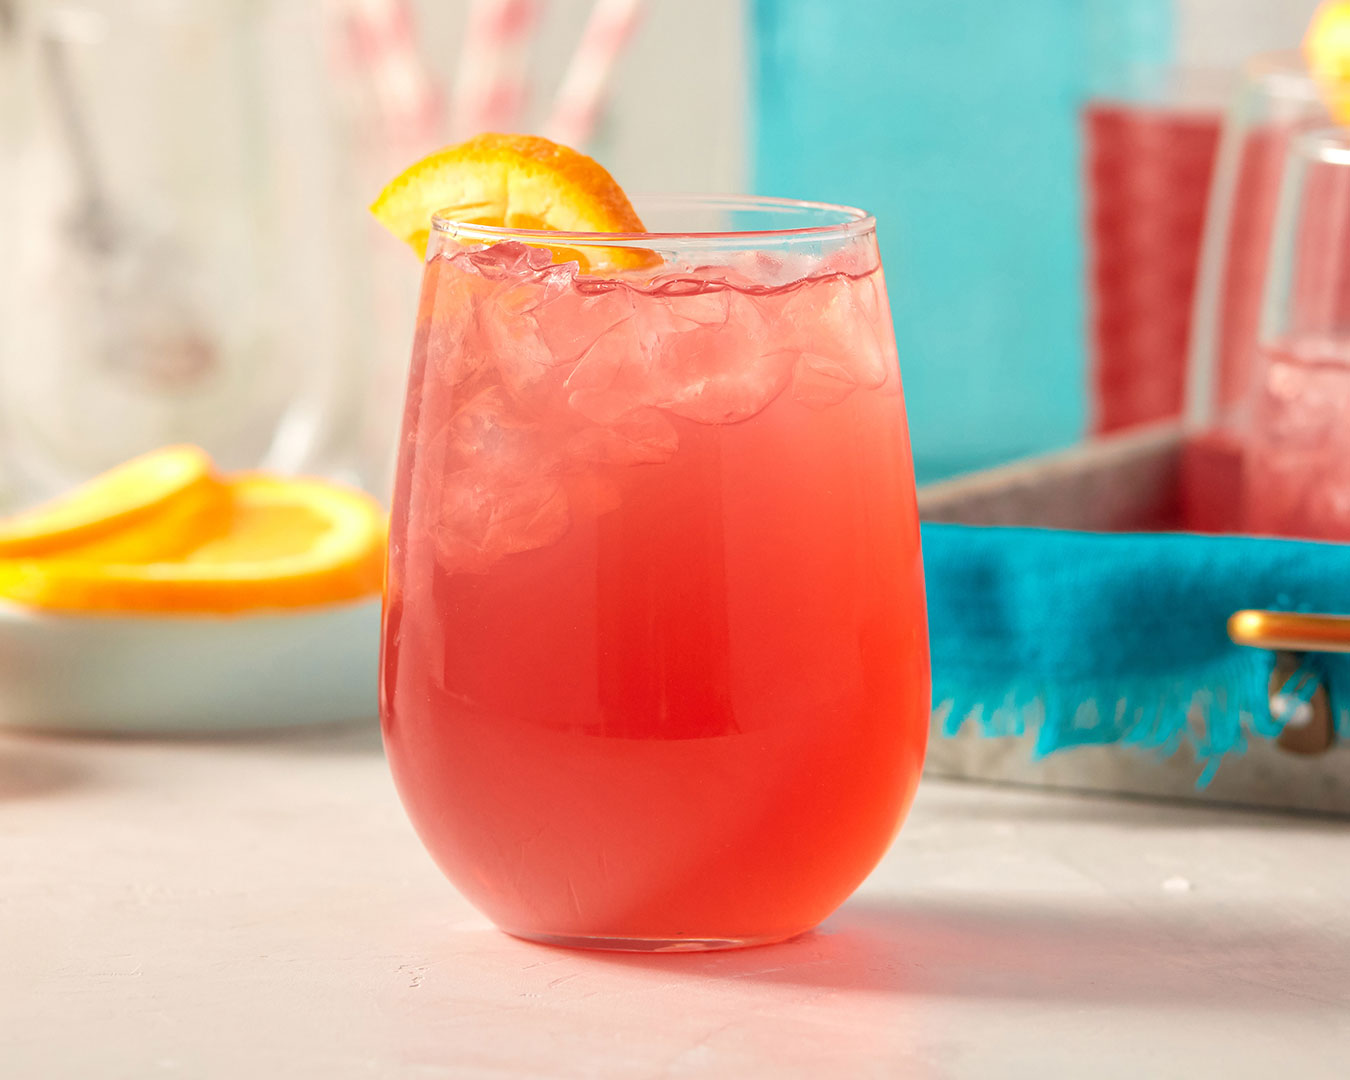 Red pink drink with oranges and summer colored background photographed by food and beverage photographer Kate Benson.